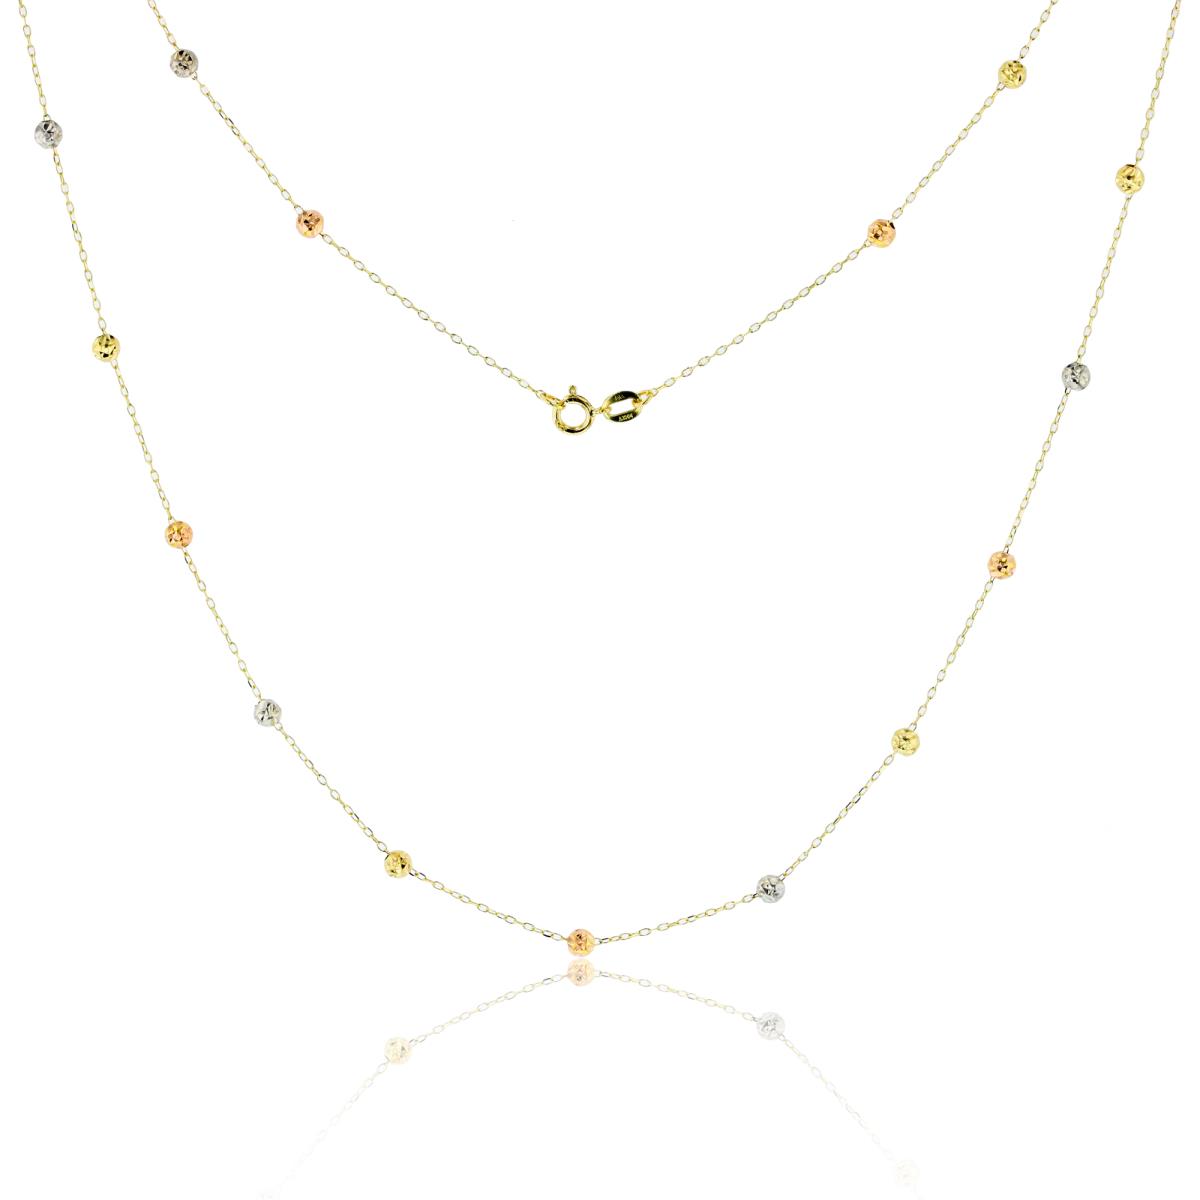 10K Tricolor Gold Cable Chain with Star Diamond Cut Beads 18" Necklace